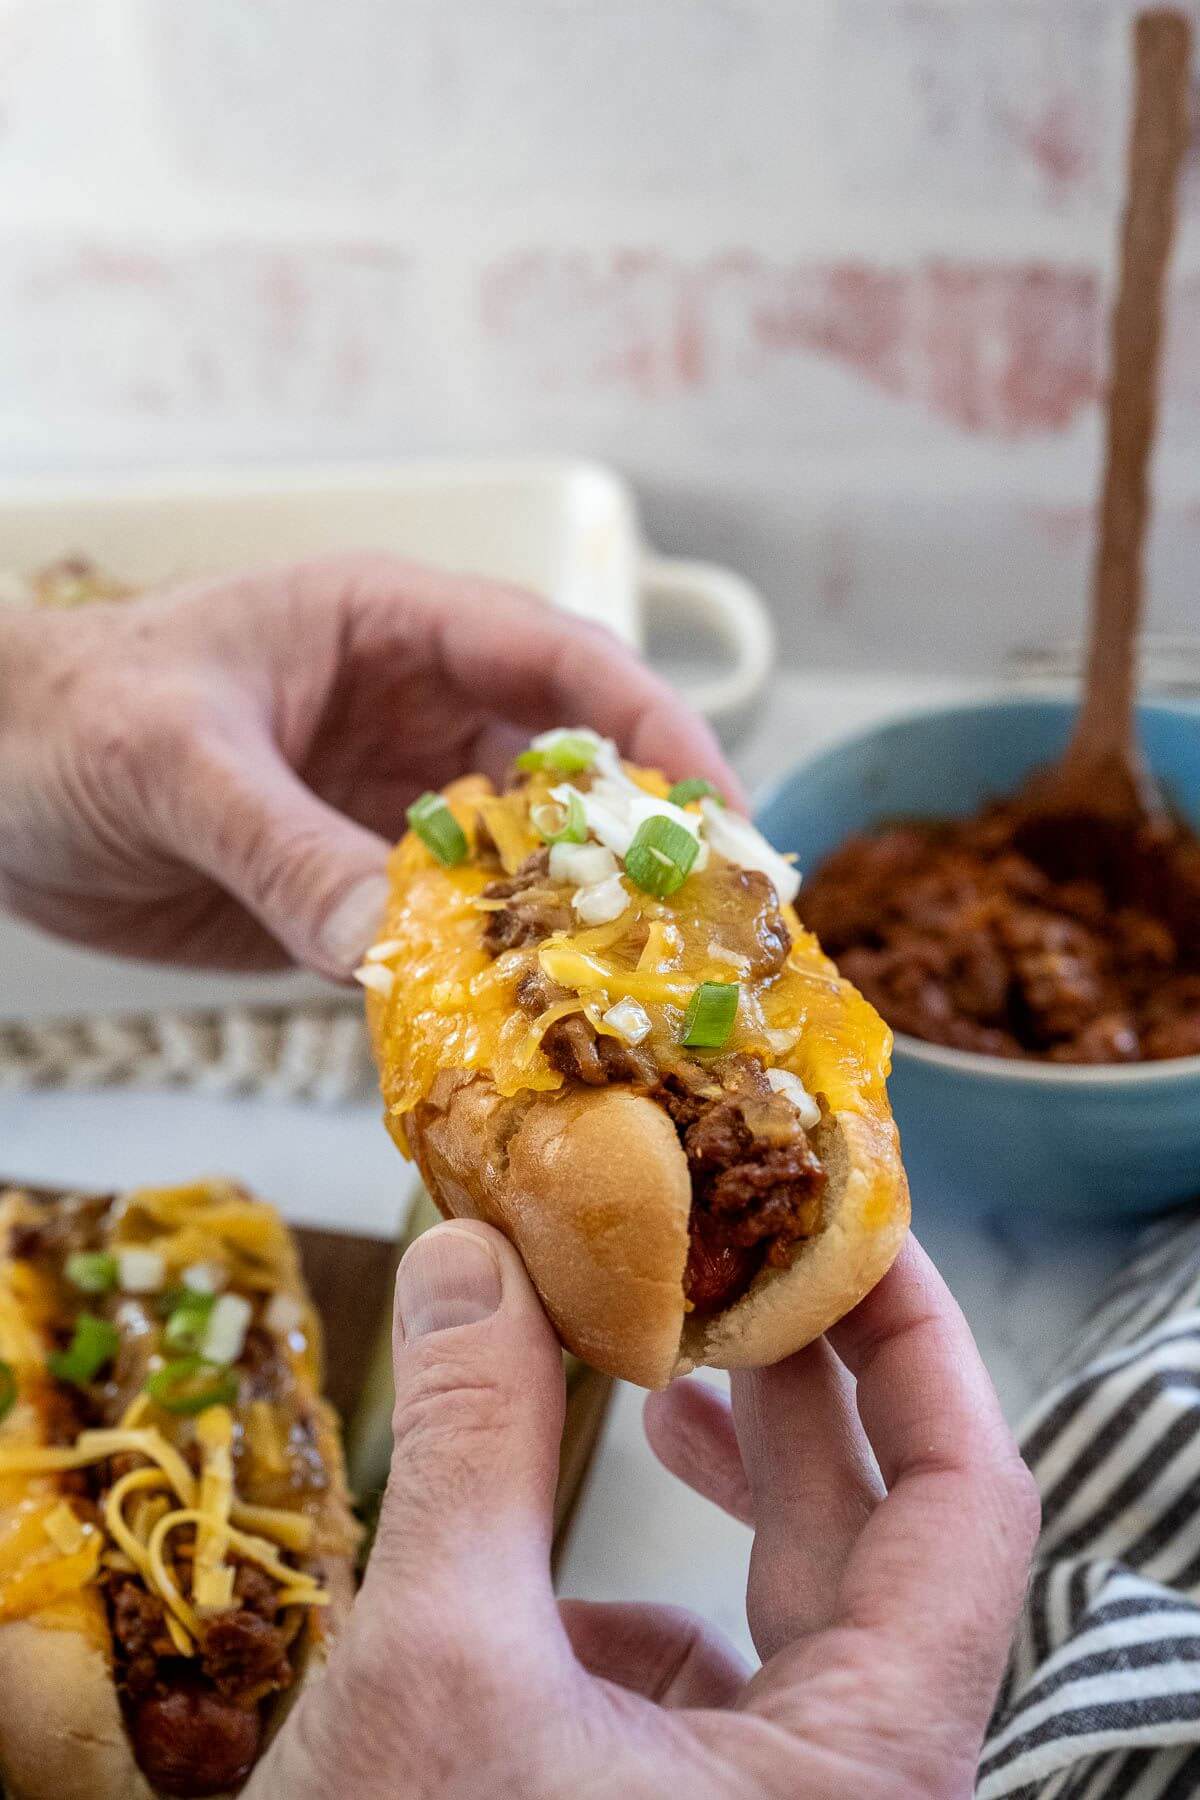 A chili dog is held by two hands above the full casserole dish.